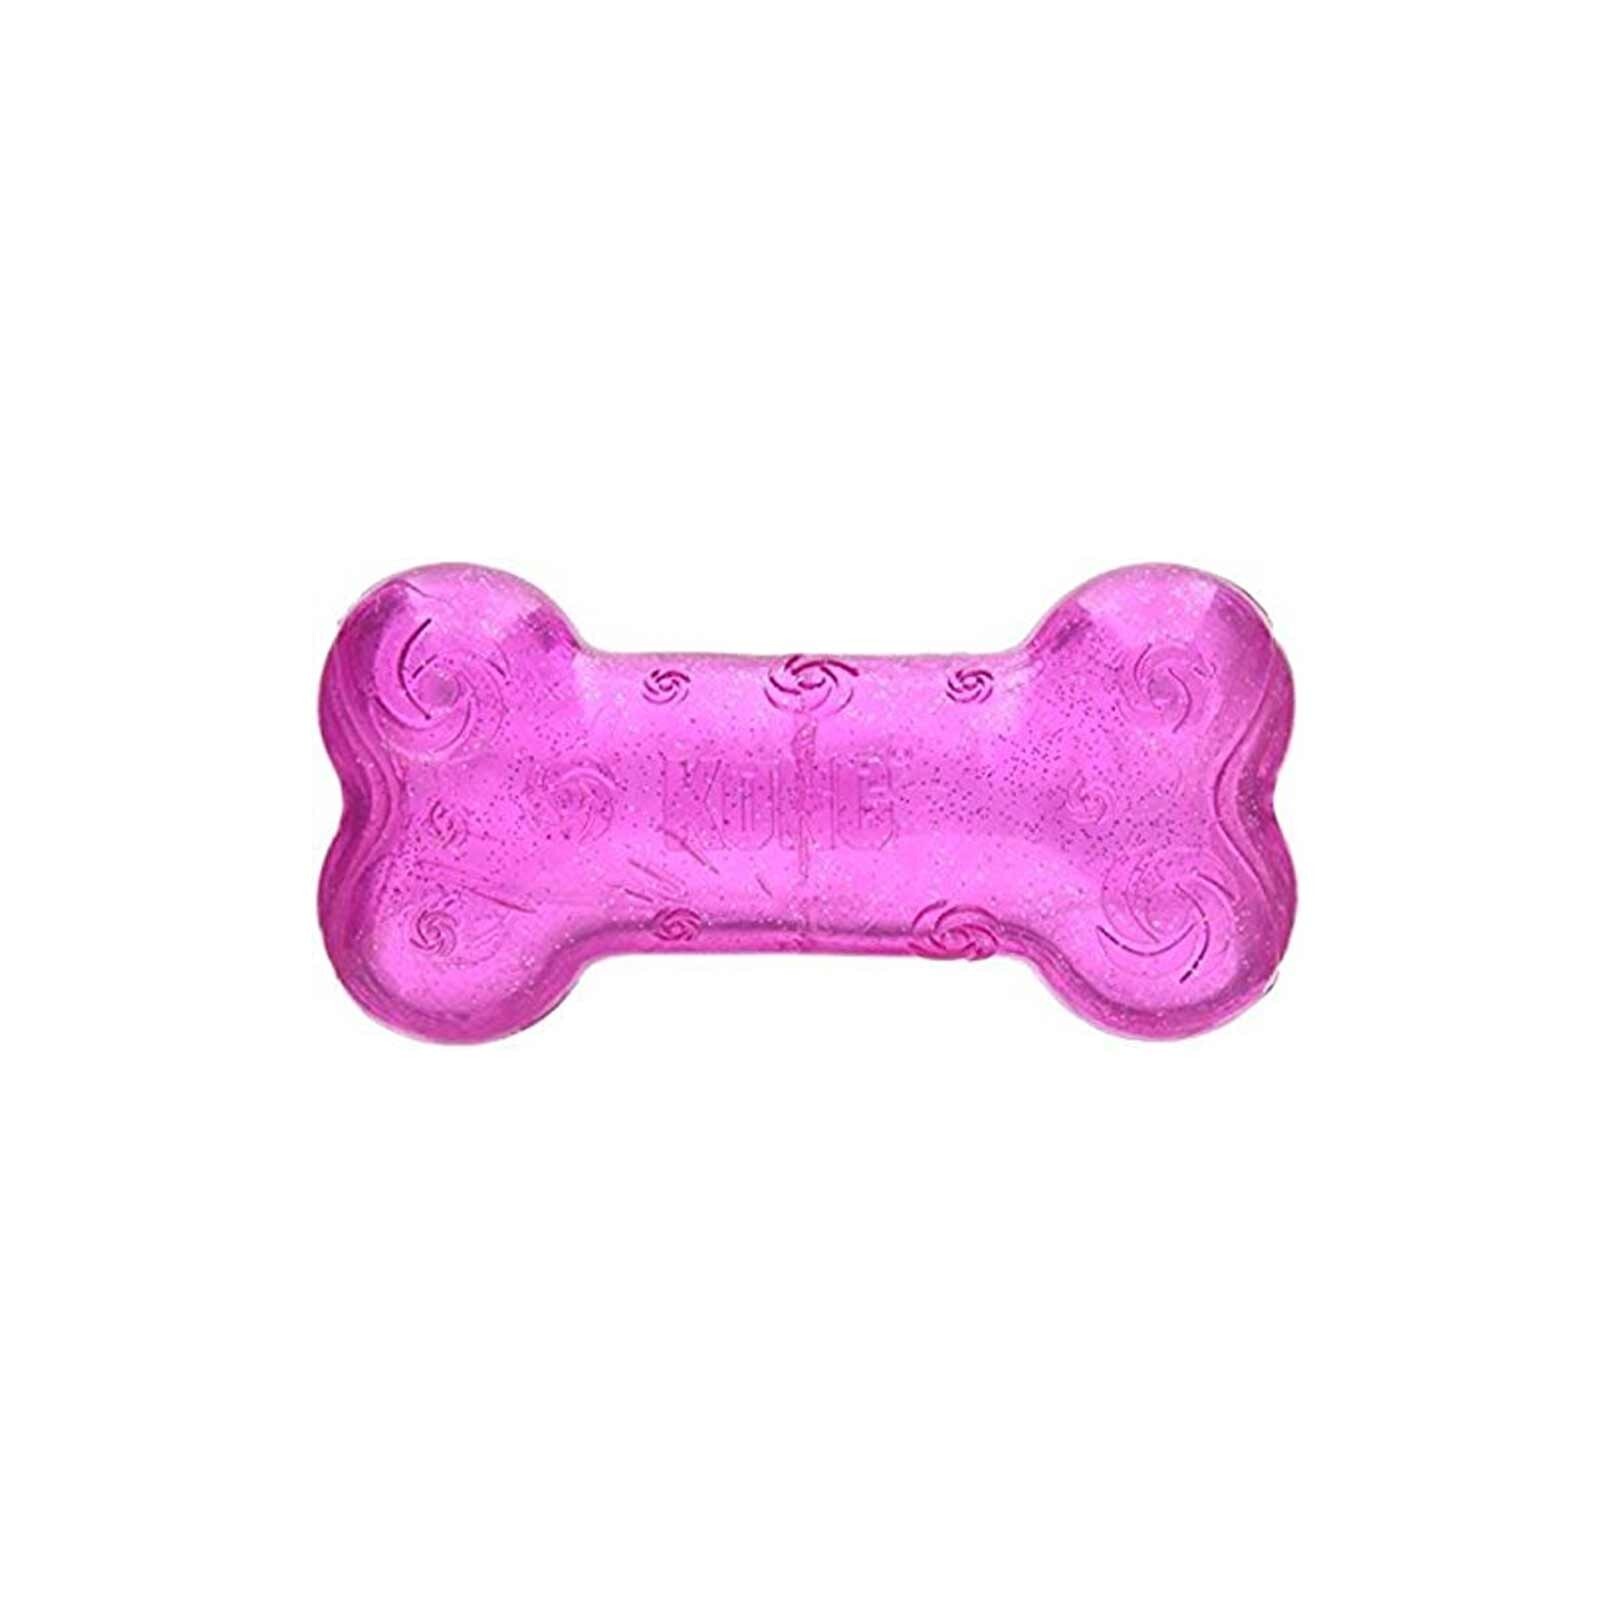 KONG Squeezz Crackle Textured Glitter Bone Dog Toy in Assorted Colours - Large - 4 Unit/s image 0